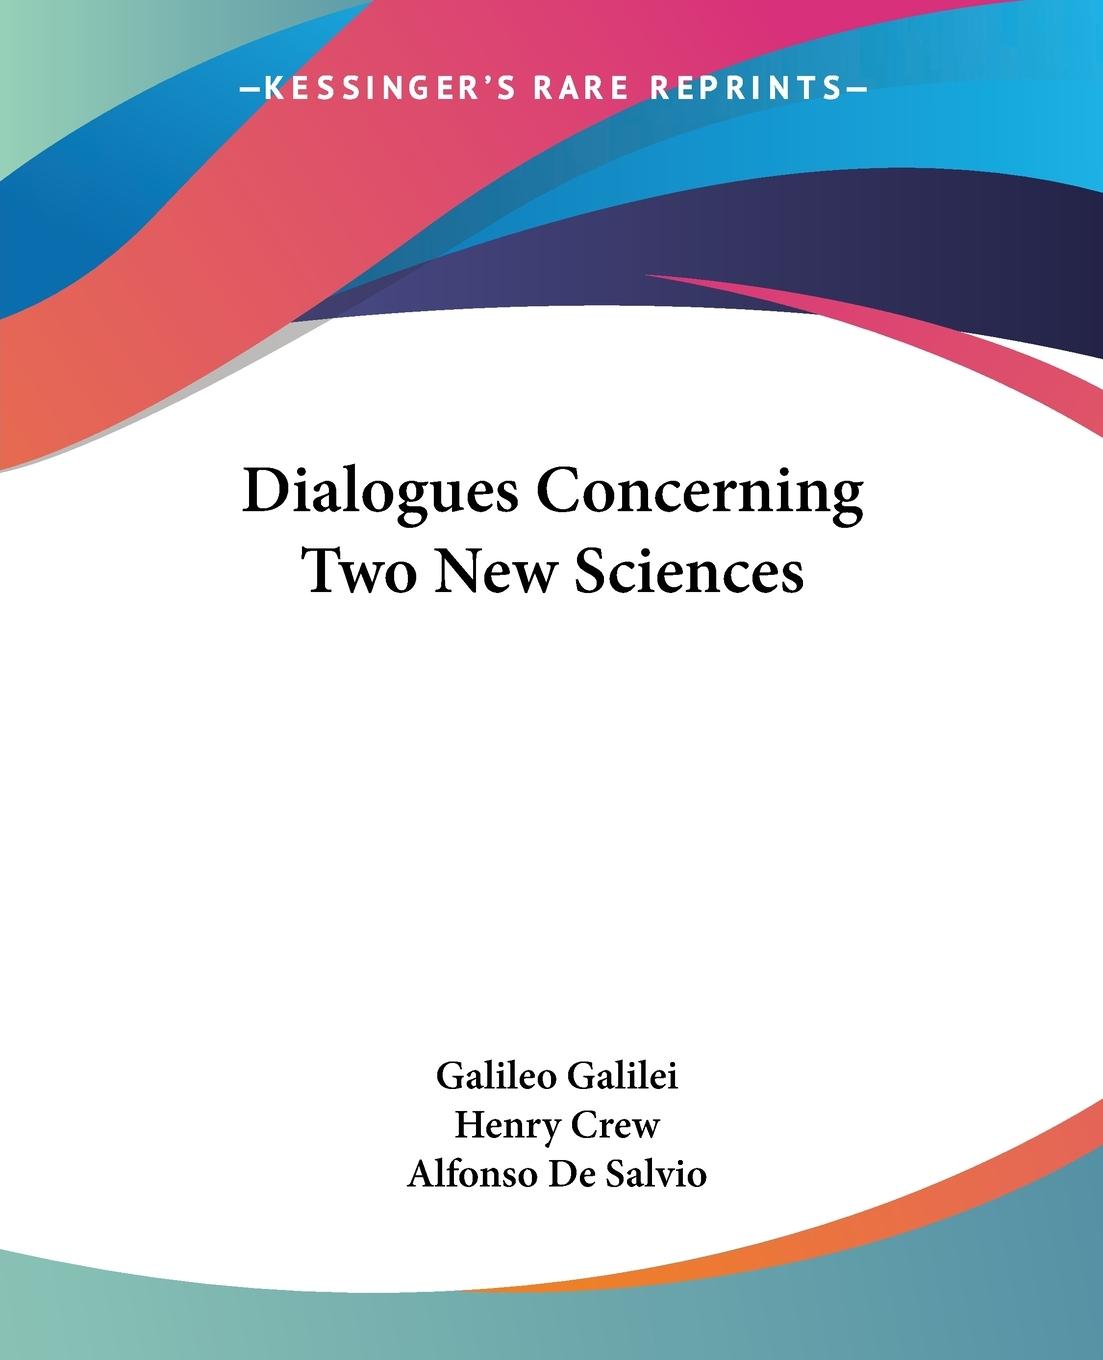 Dialogues Concerning Two New Sciences - Galilei, Galileo